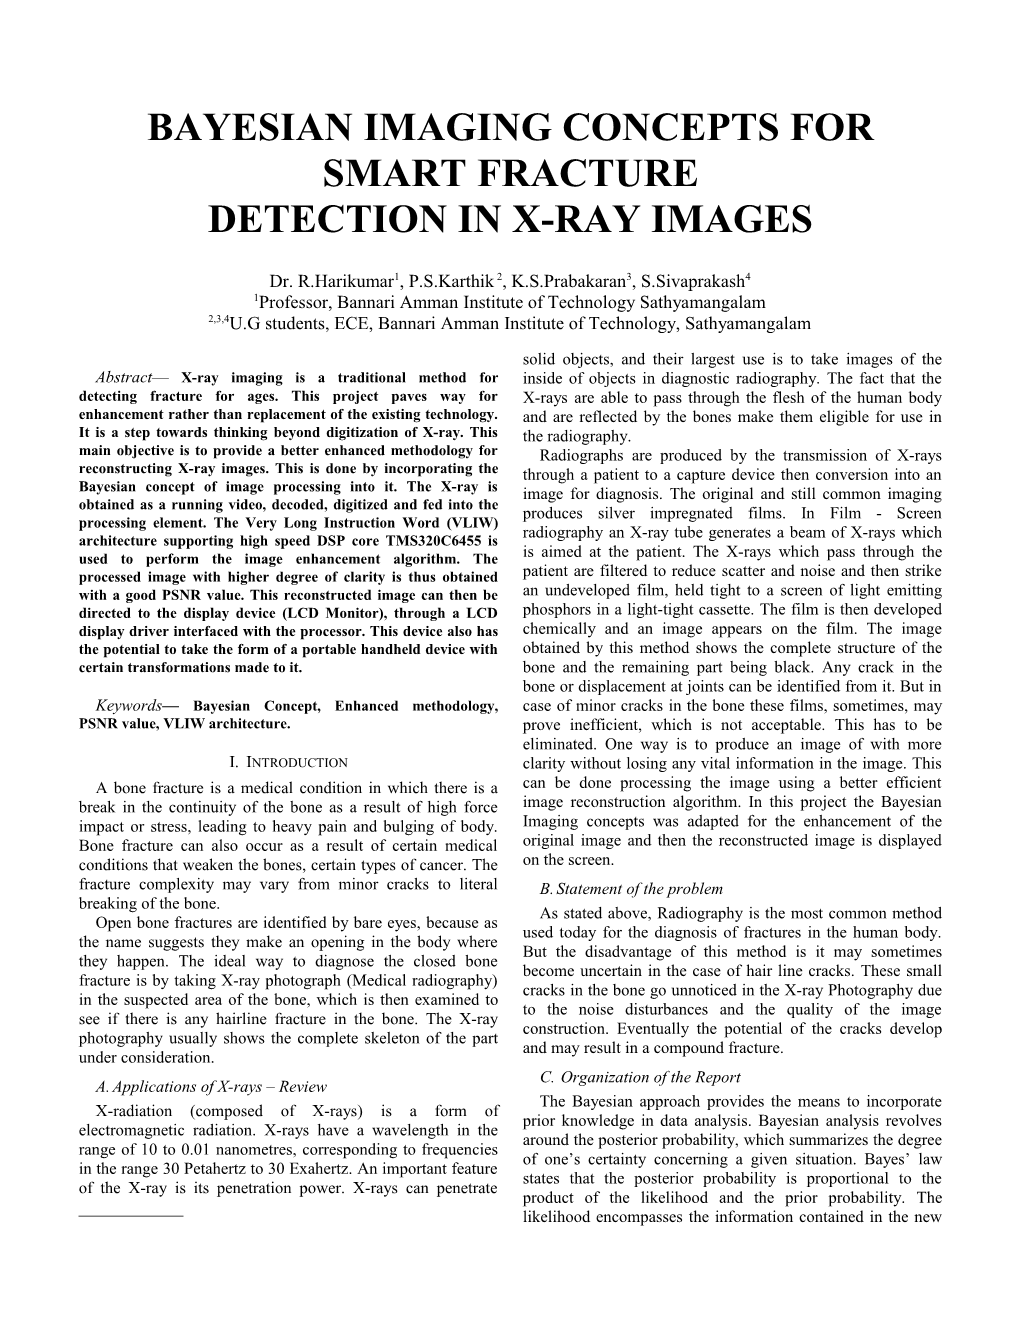 Bayesian Imaging Concepts for Smart Fracture